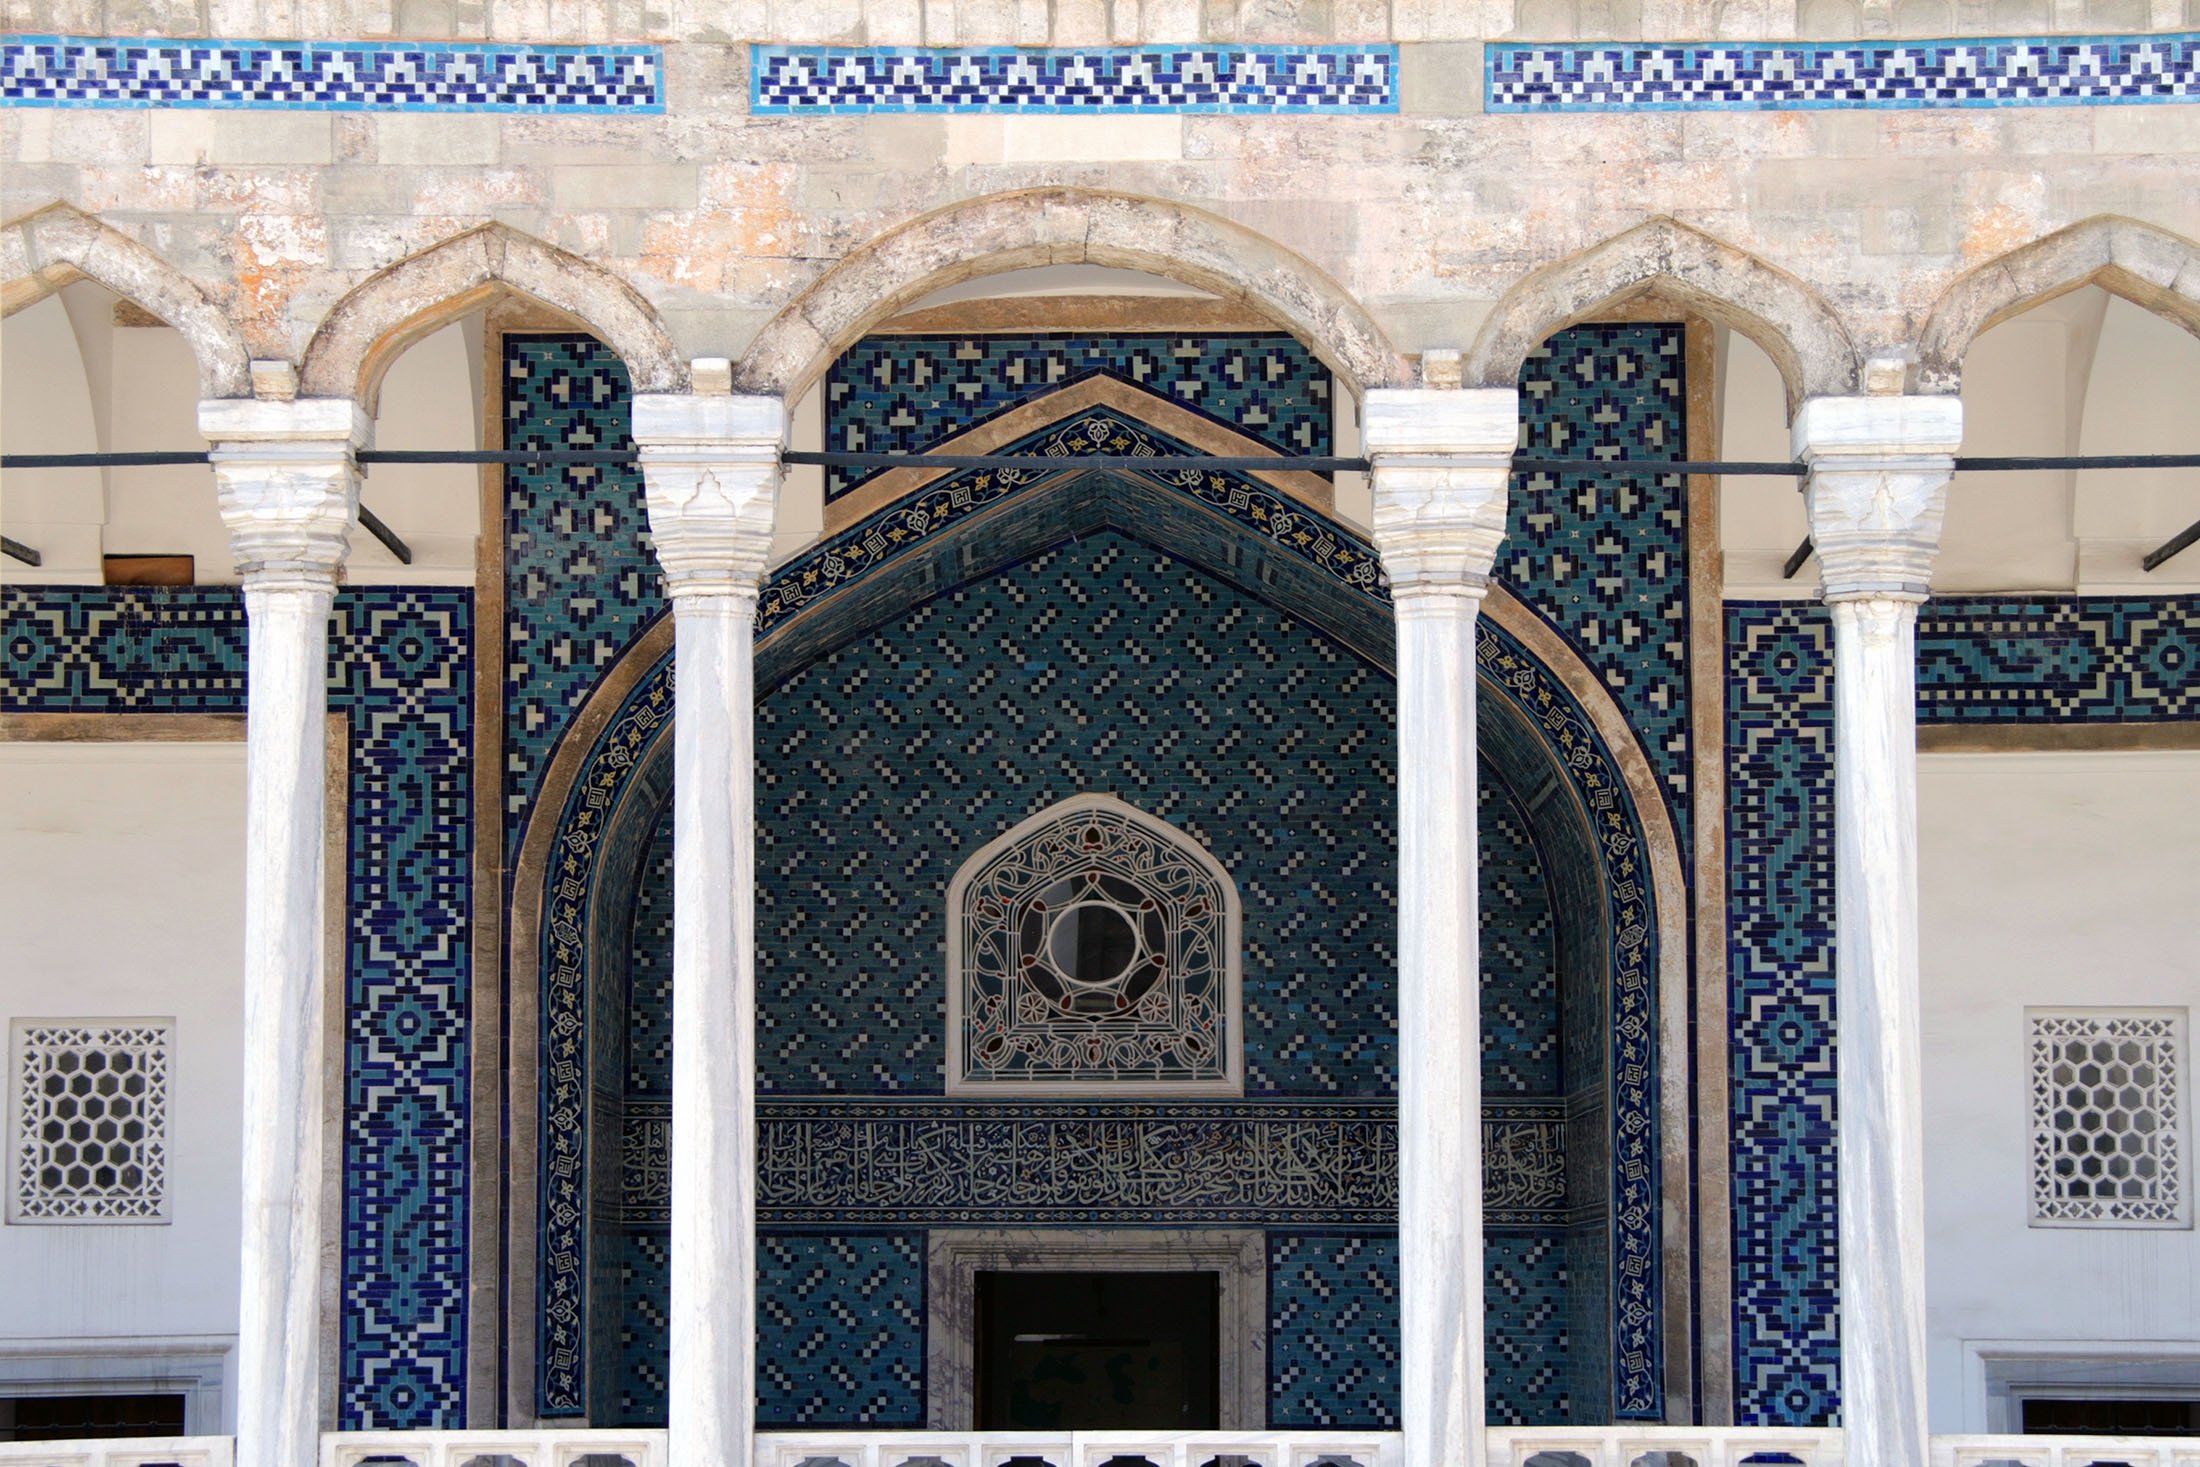 The tiled entry to the Museum of Turkish and Islamic Arts, in Istanbul, Türkiye. (Shutterstock Photo)